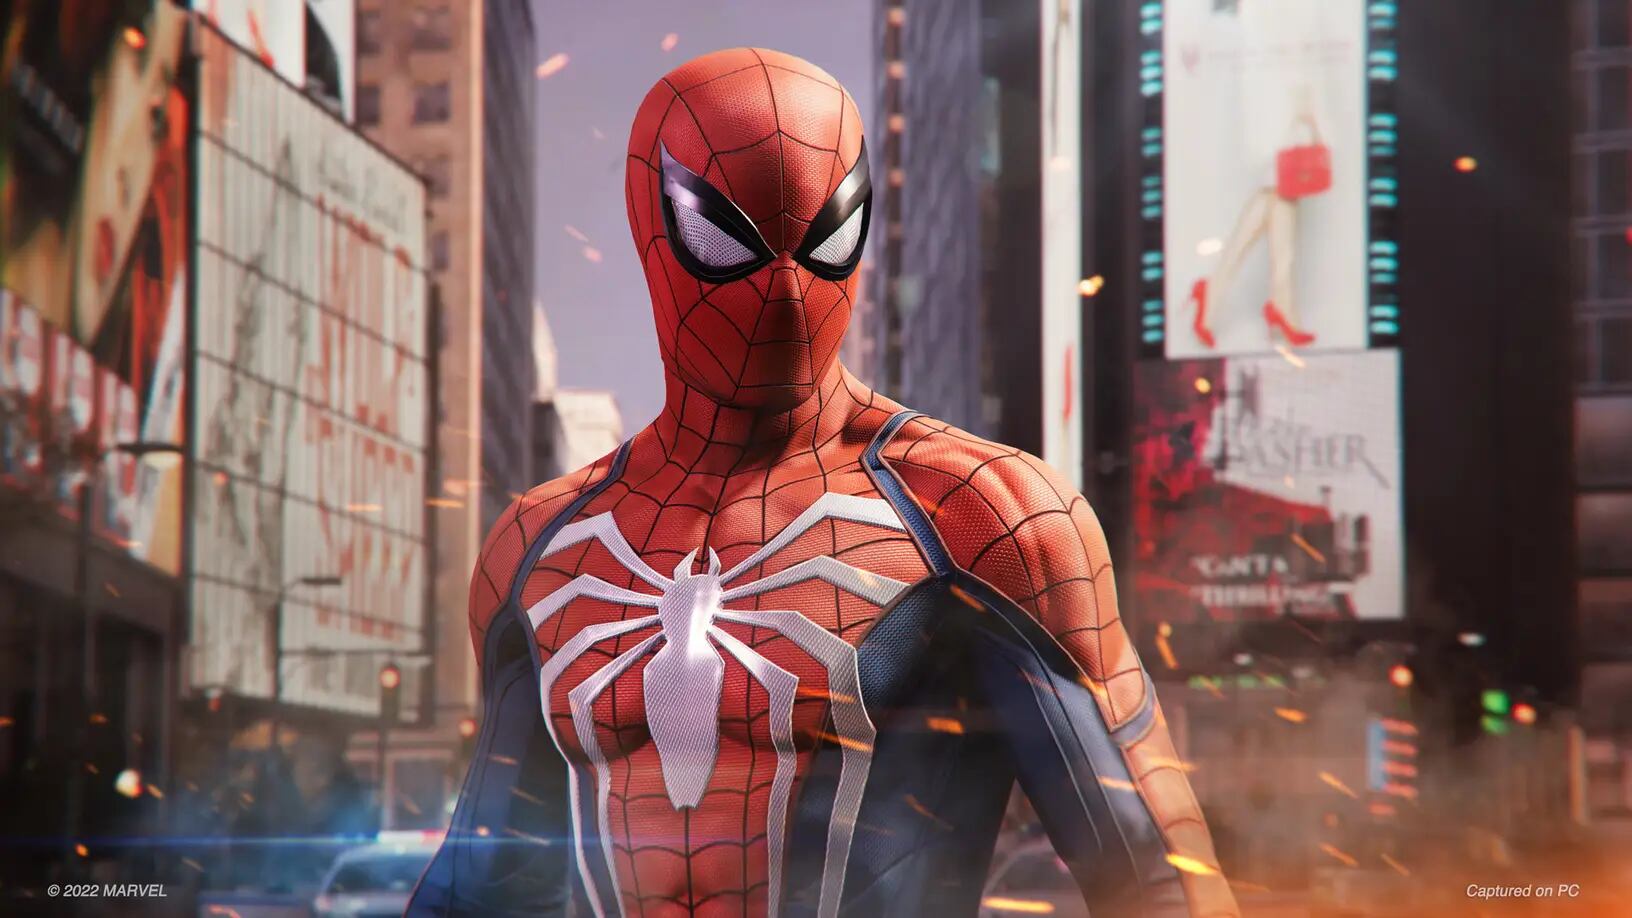 Playstation prepares for the arrival of Marvel's Spider-Man 2: they publish great promotions for the previous games